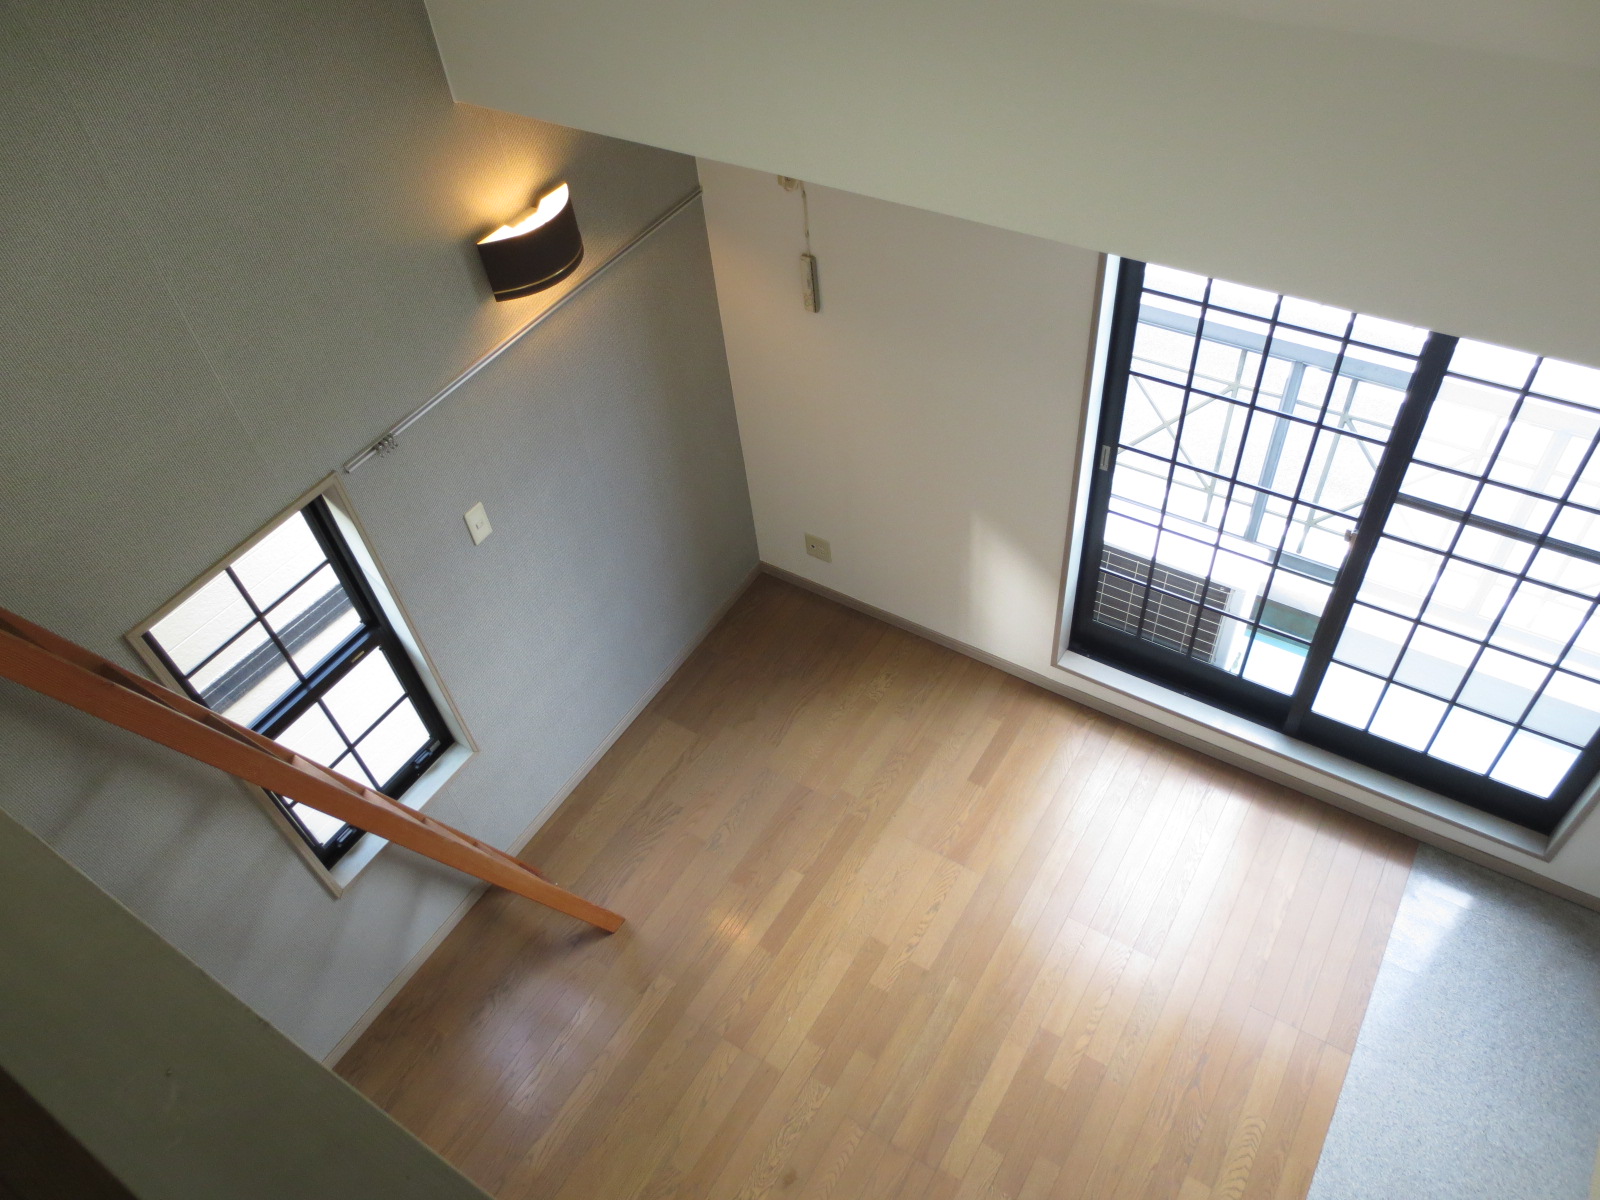 Living and room. It is a view from a loft